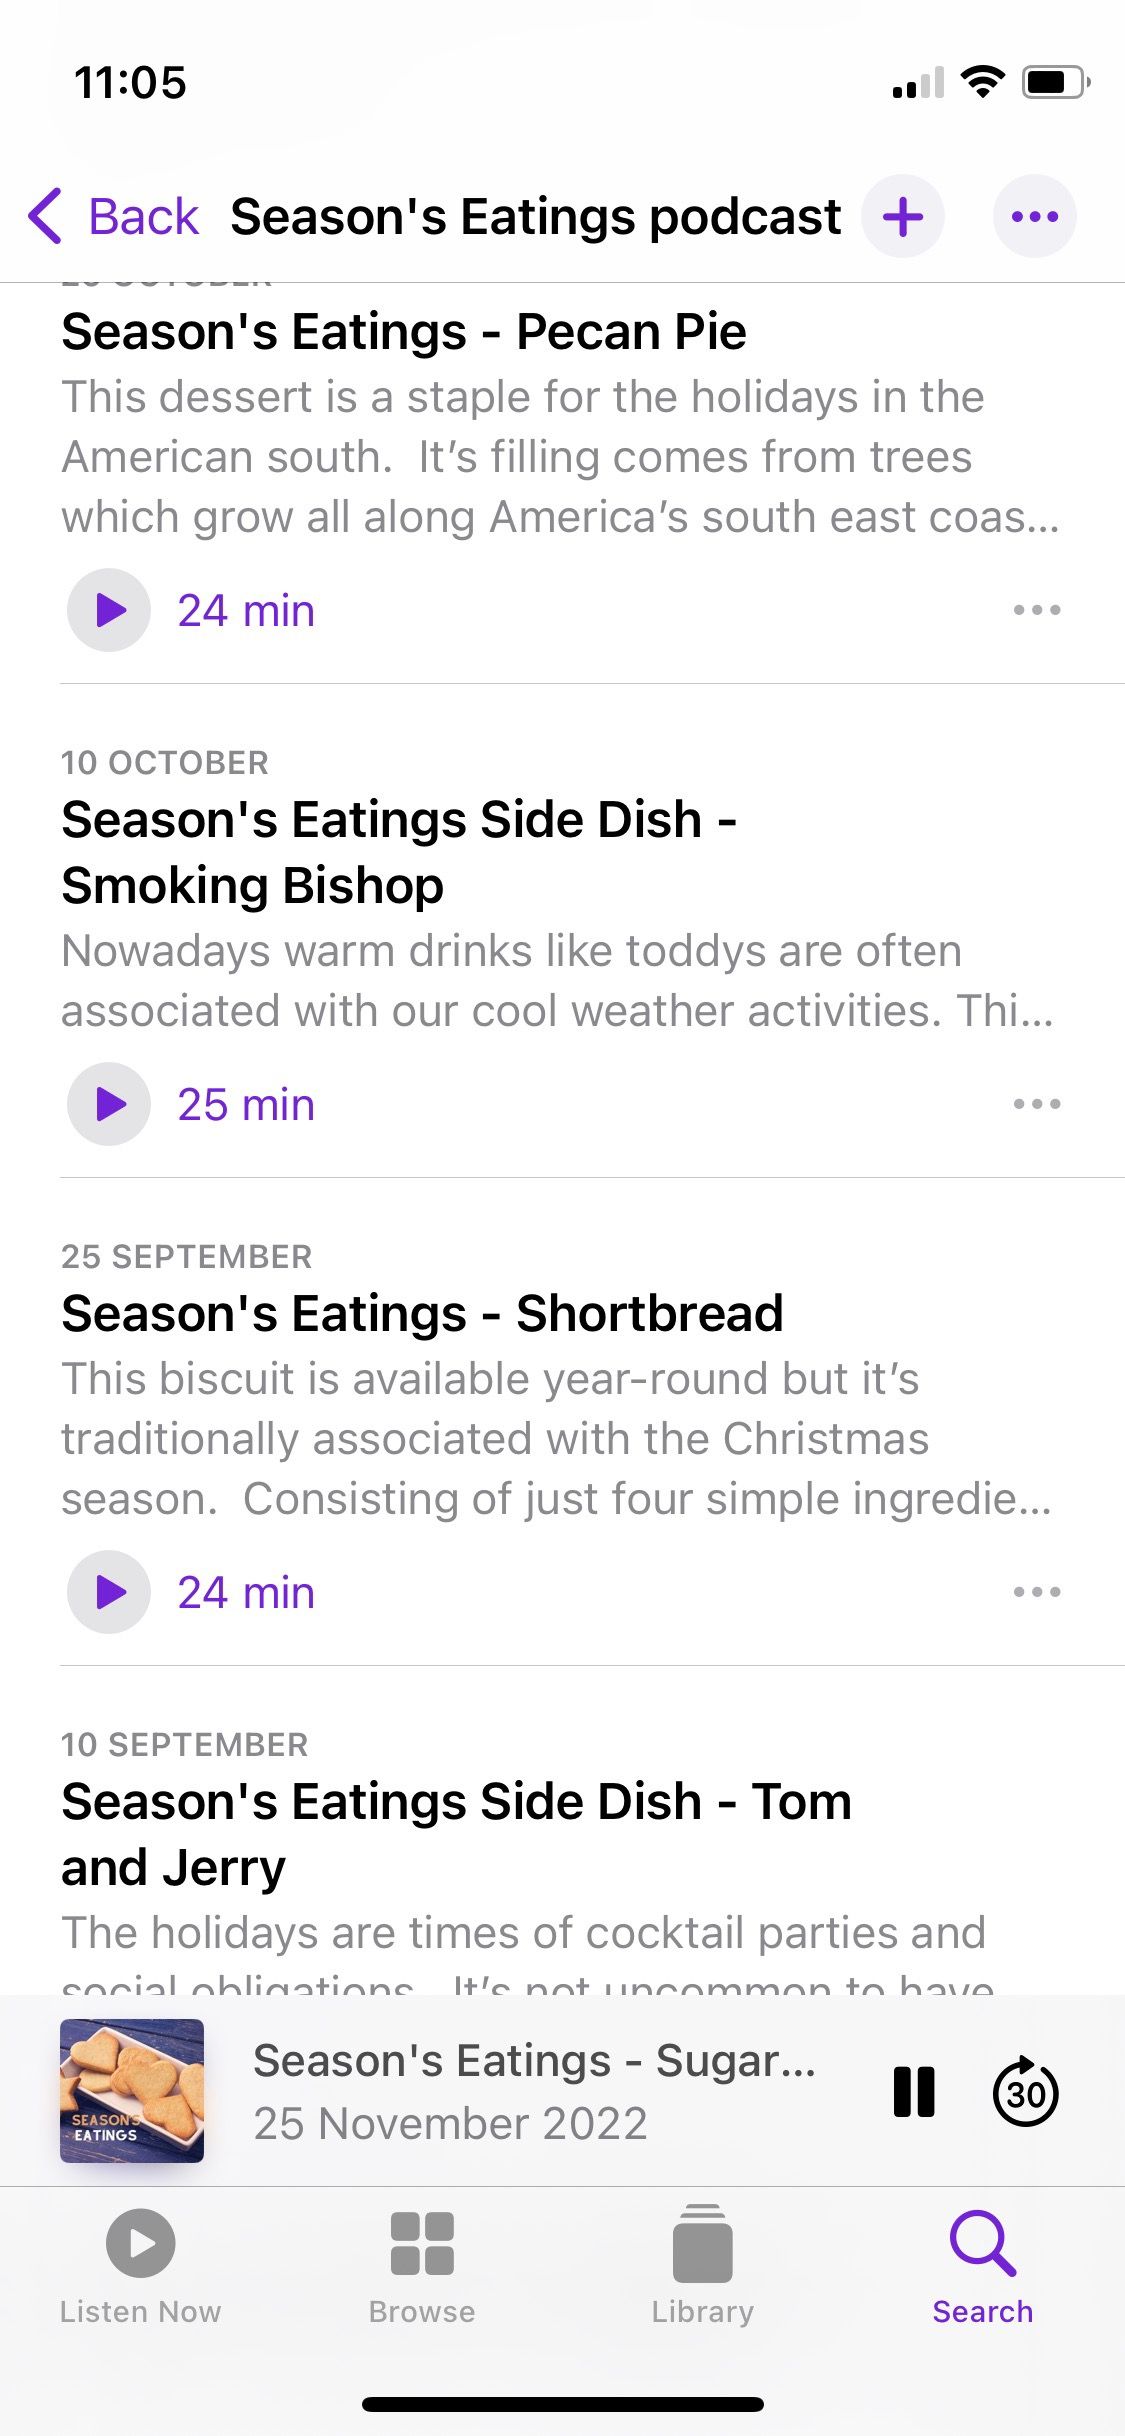 Screenshot of the Seasons Eating podcast showing the list of episodes